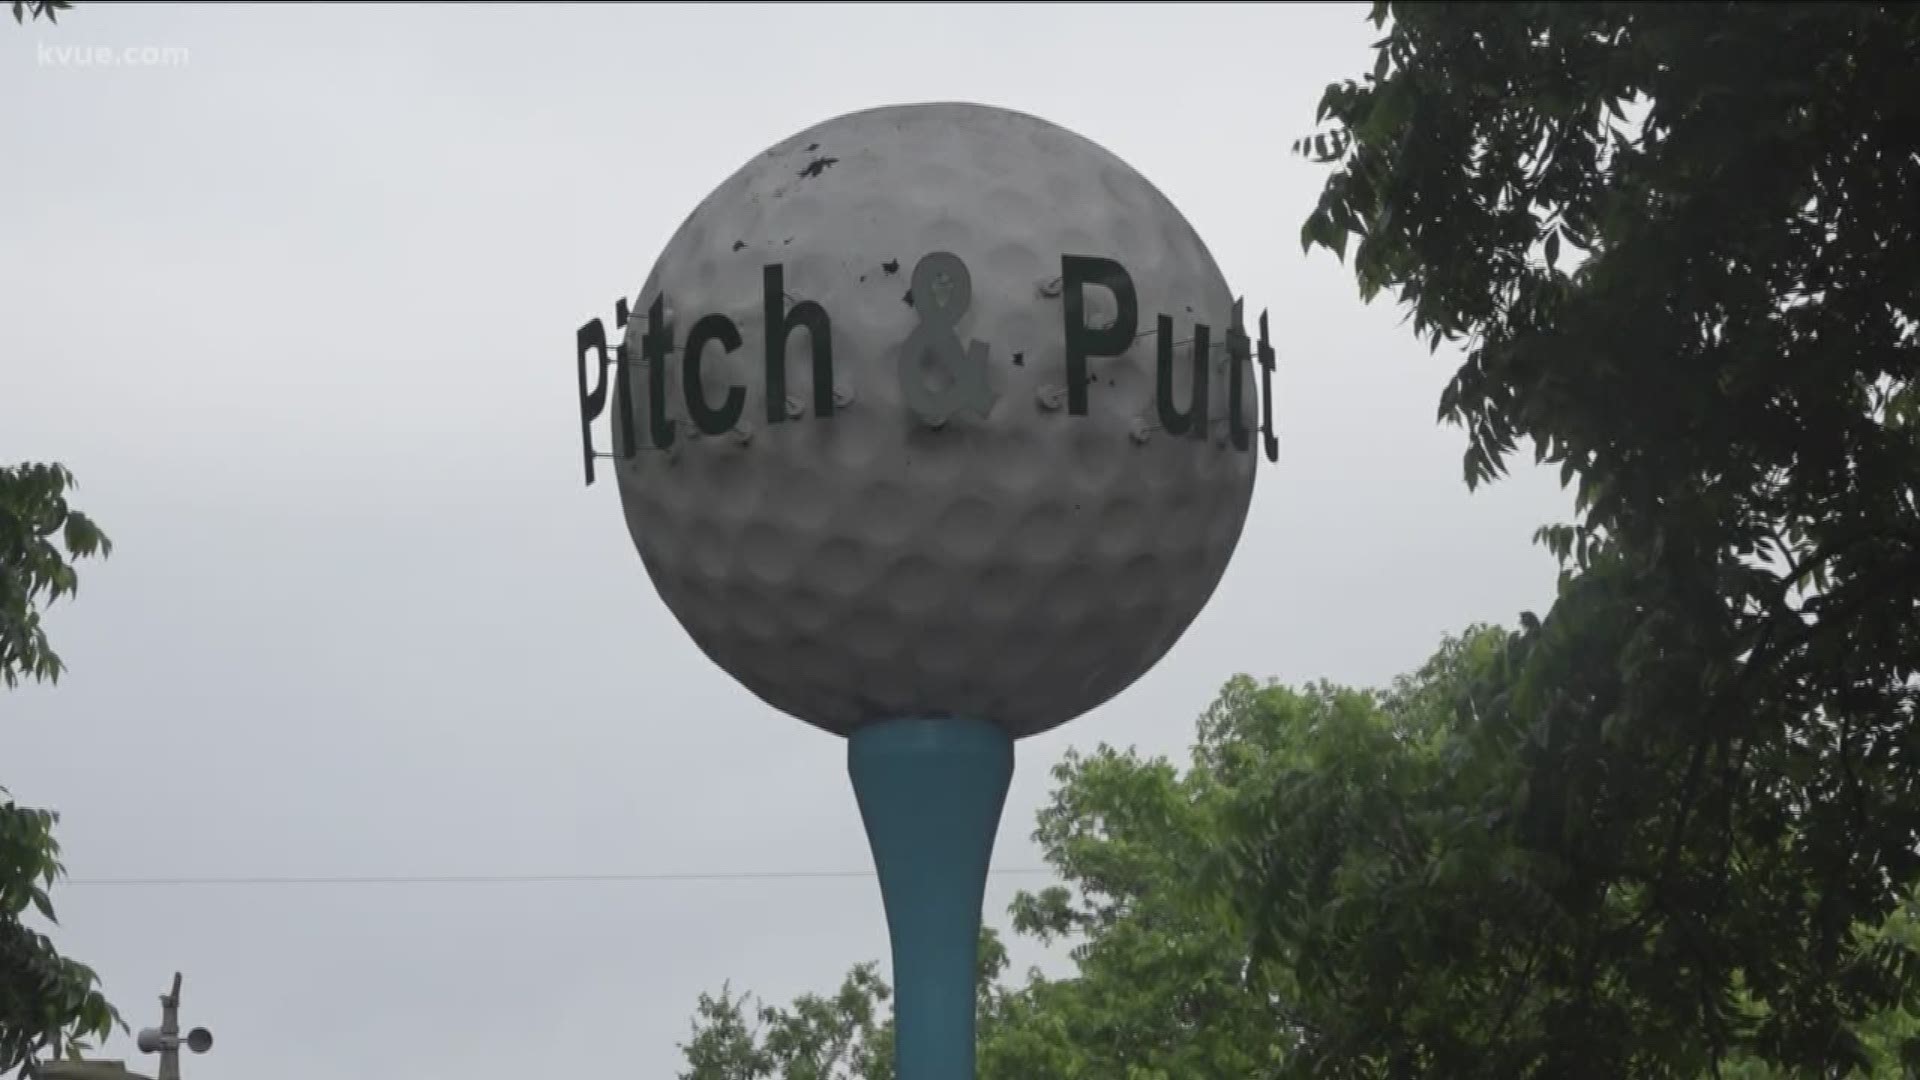 For the past 70 years, one family has kept Butler Park Pitch & Putt going strong. But that may change because of a missing signature on an important document.